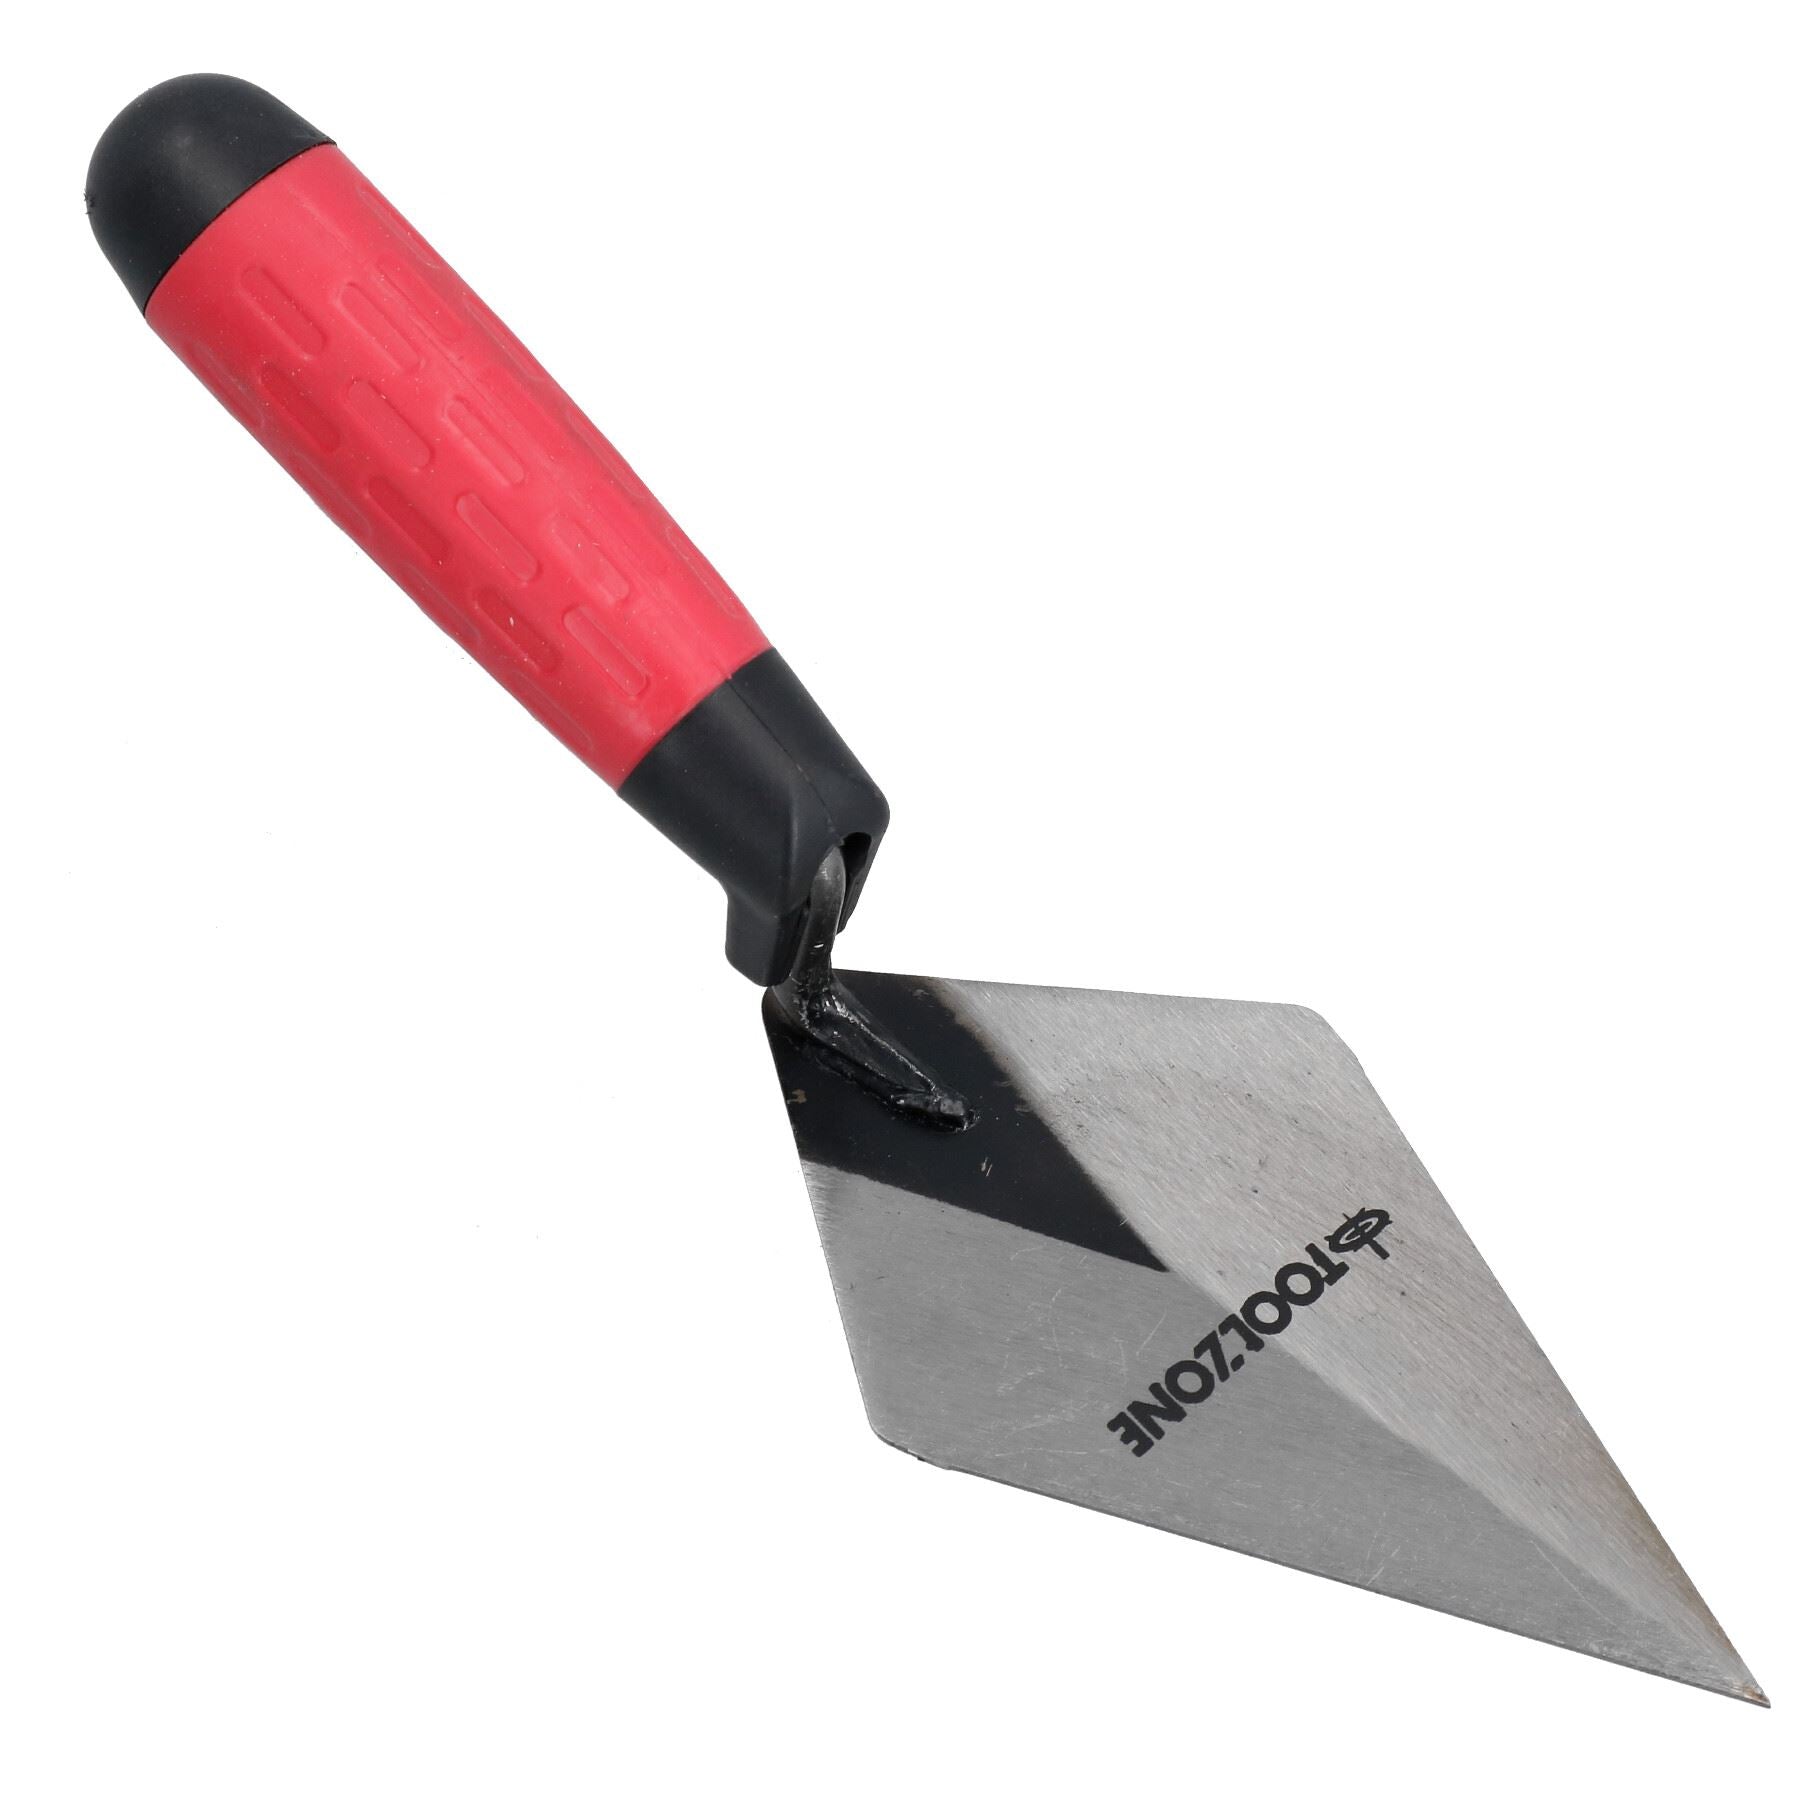 6” Pointing Trowel for Brick Block laying Cement Plastering Soft Grip handle